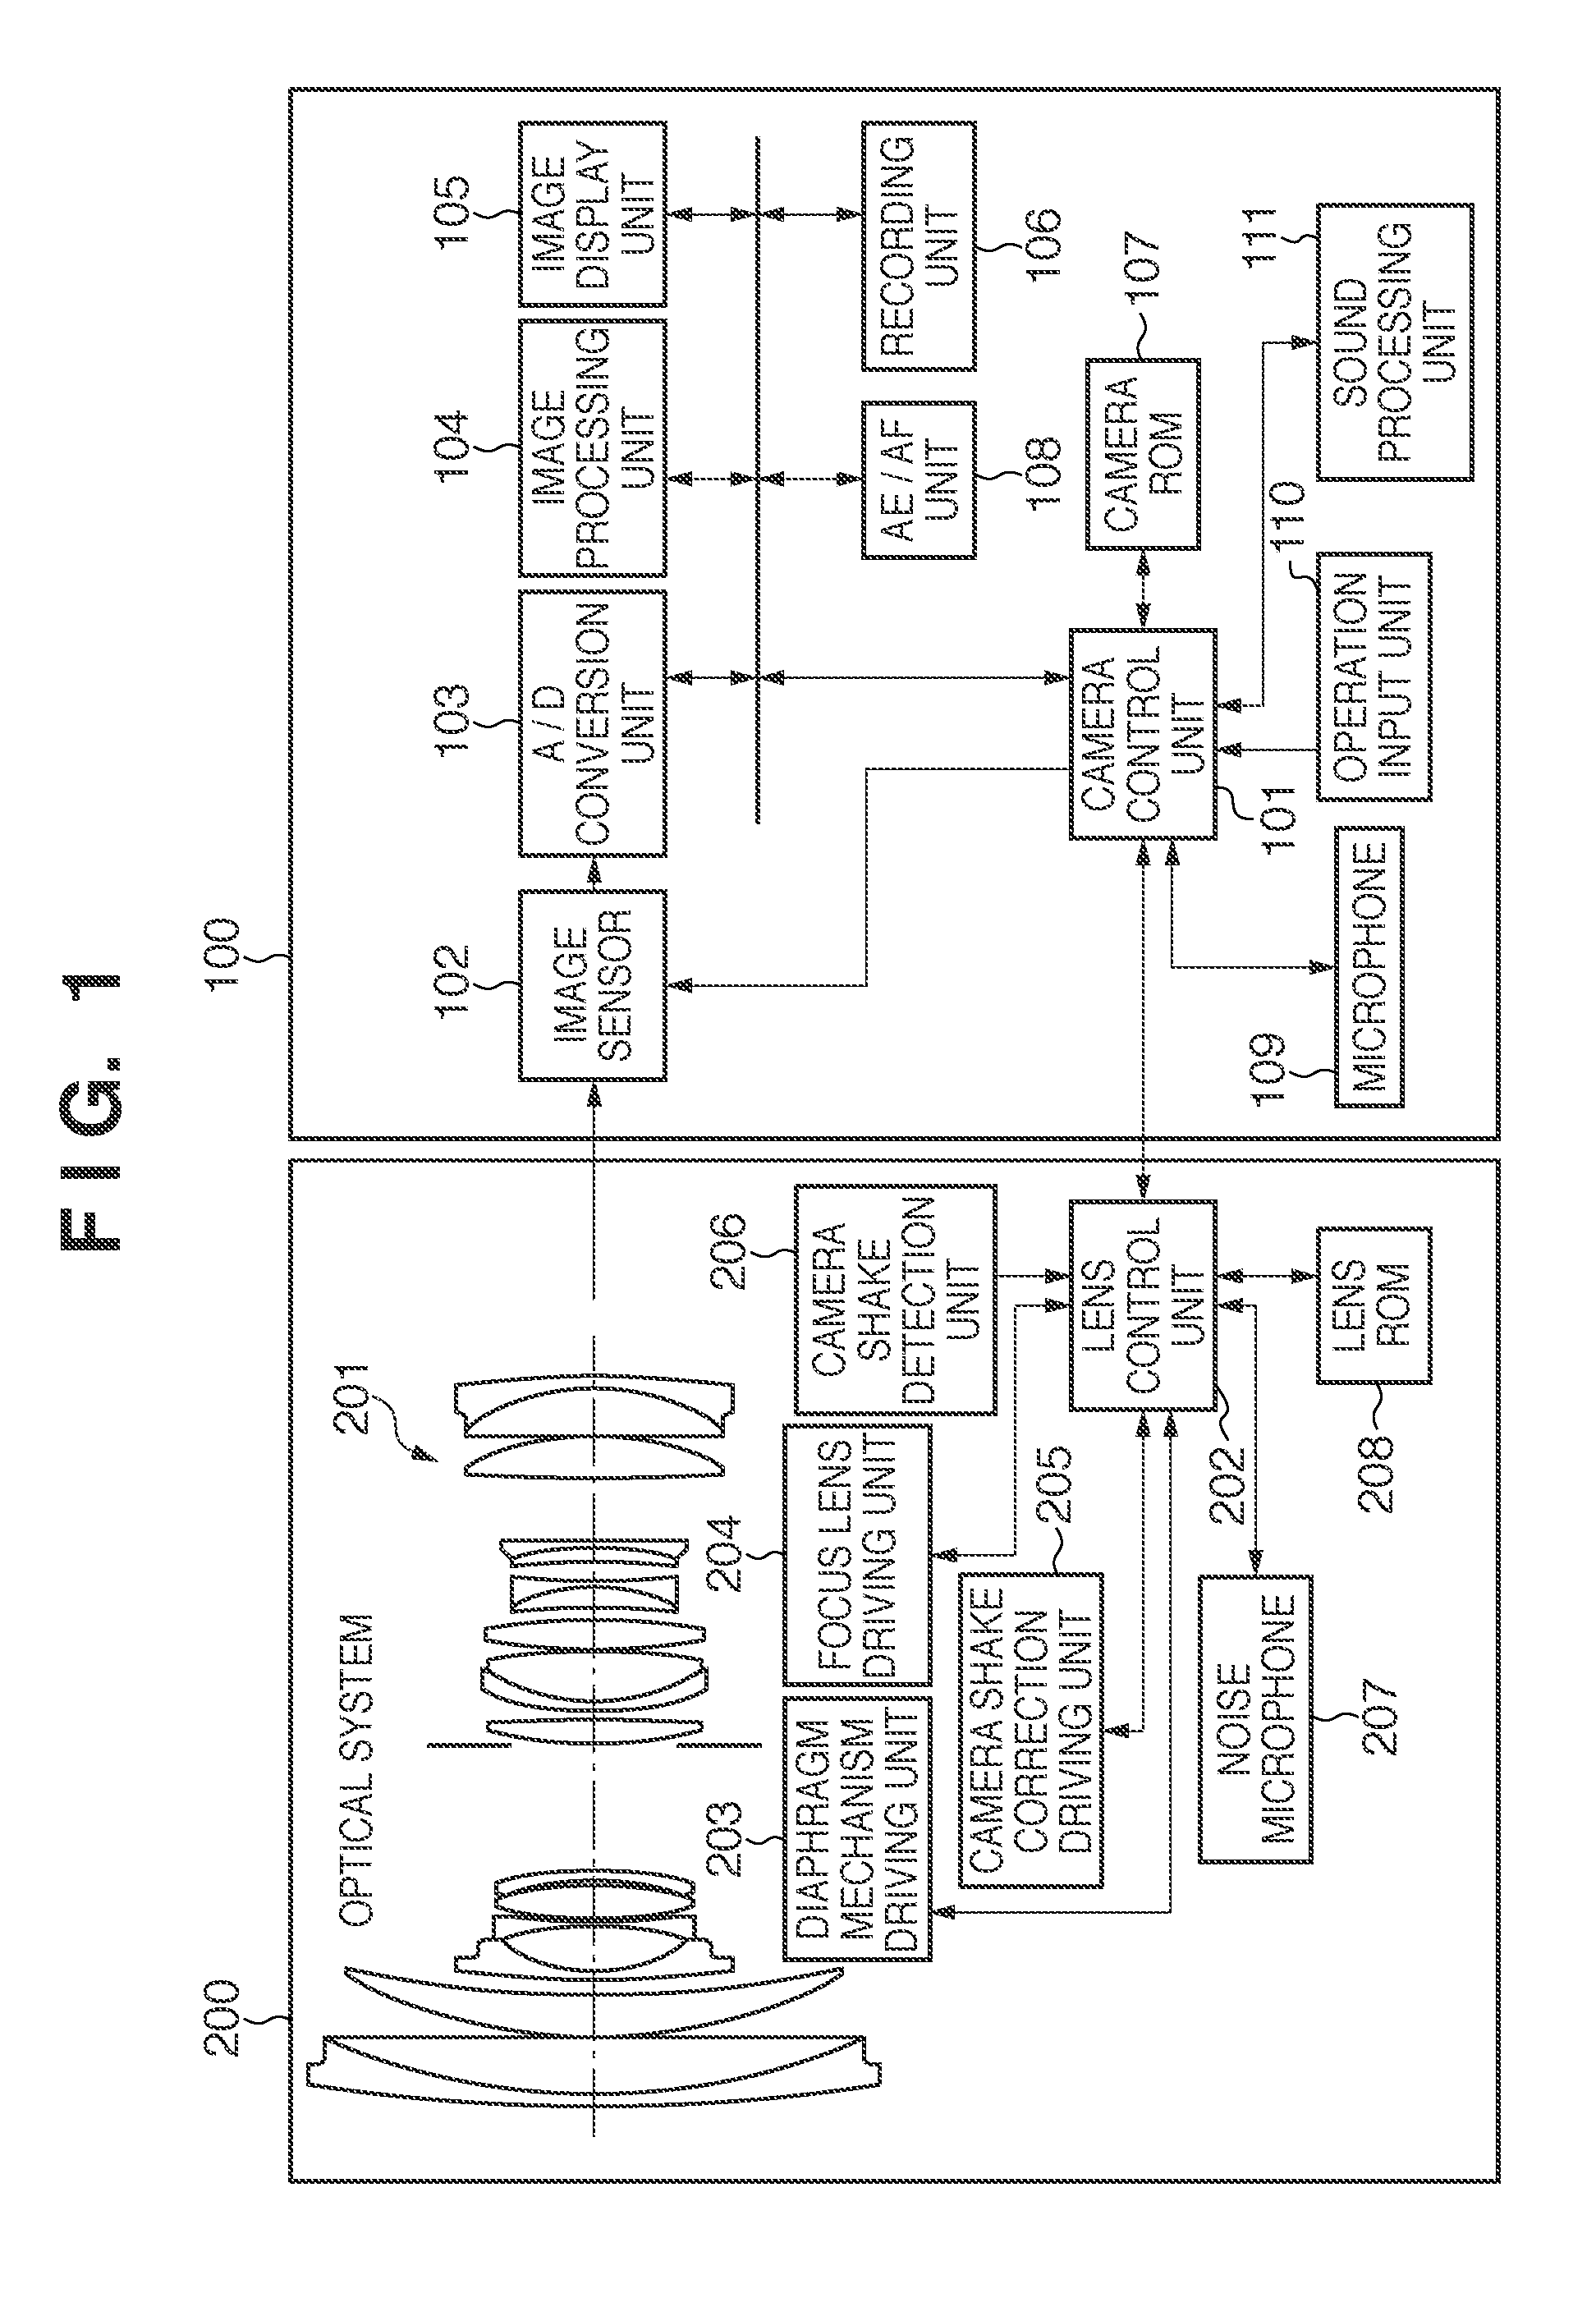 Image sensing apparatus and system